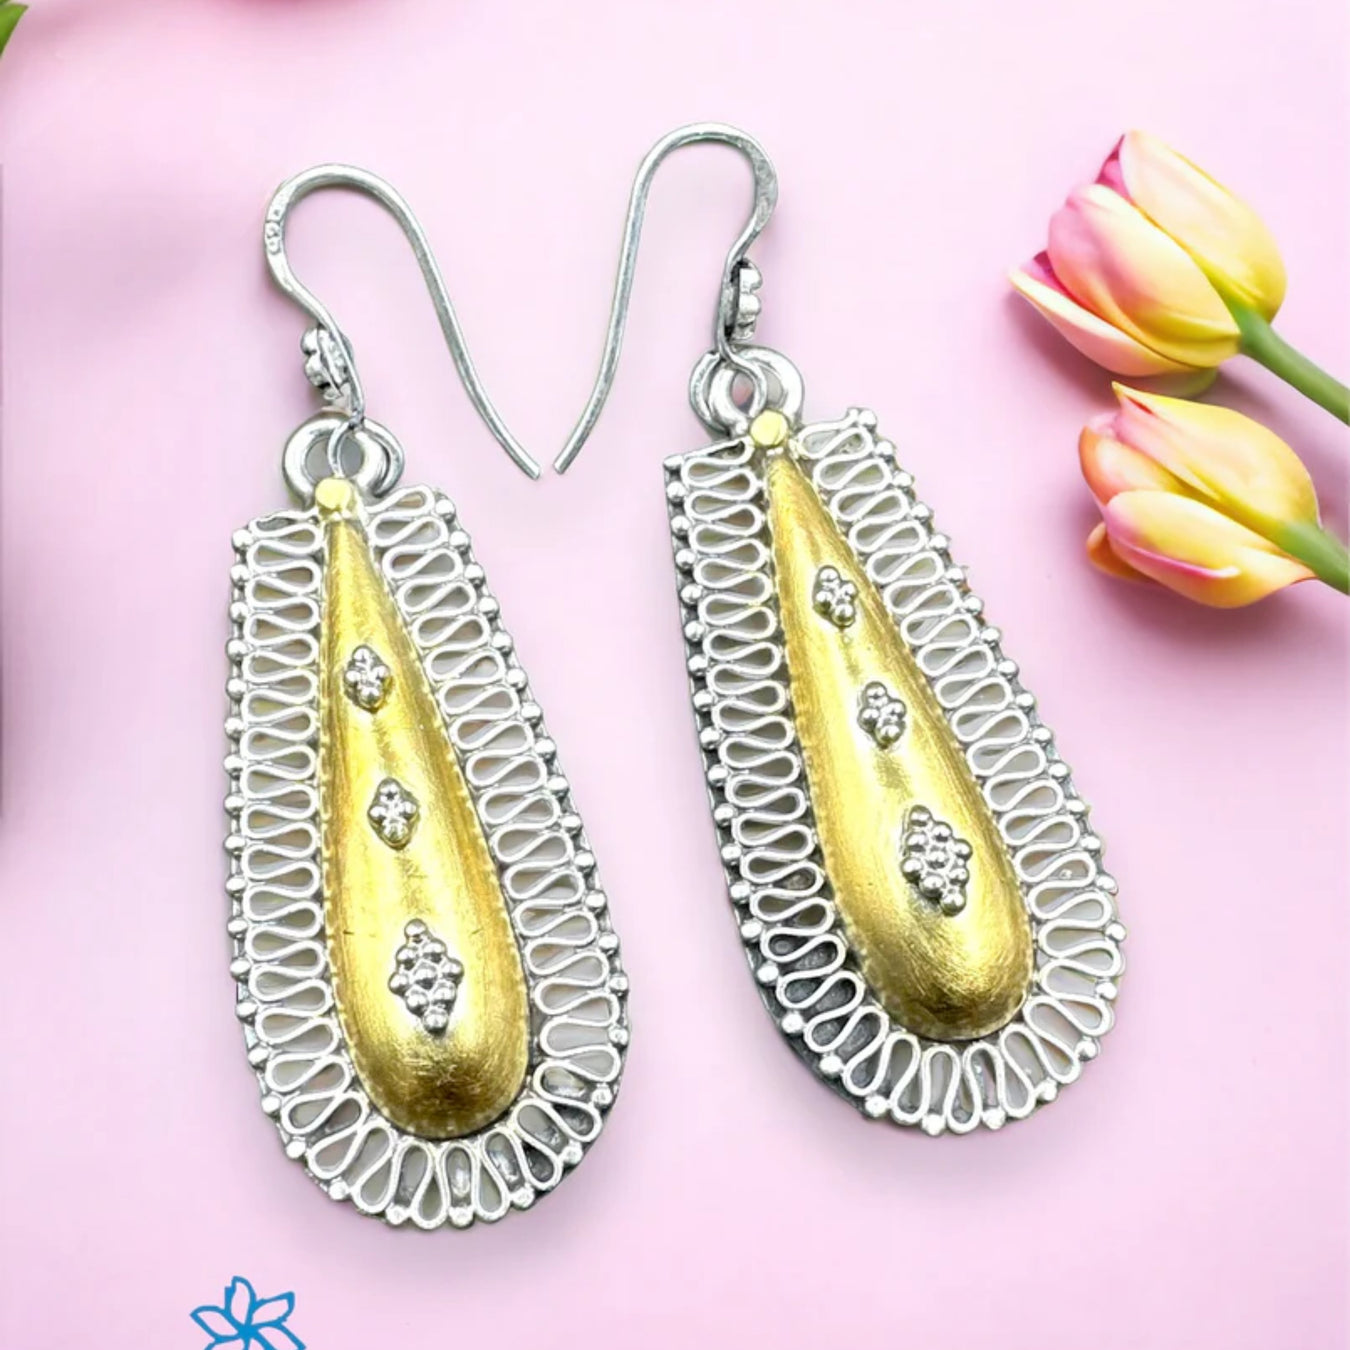 Dvidha- Chic Two Tone Silver Jewellery